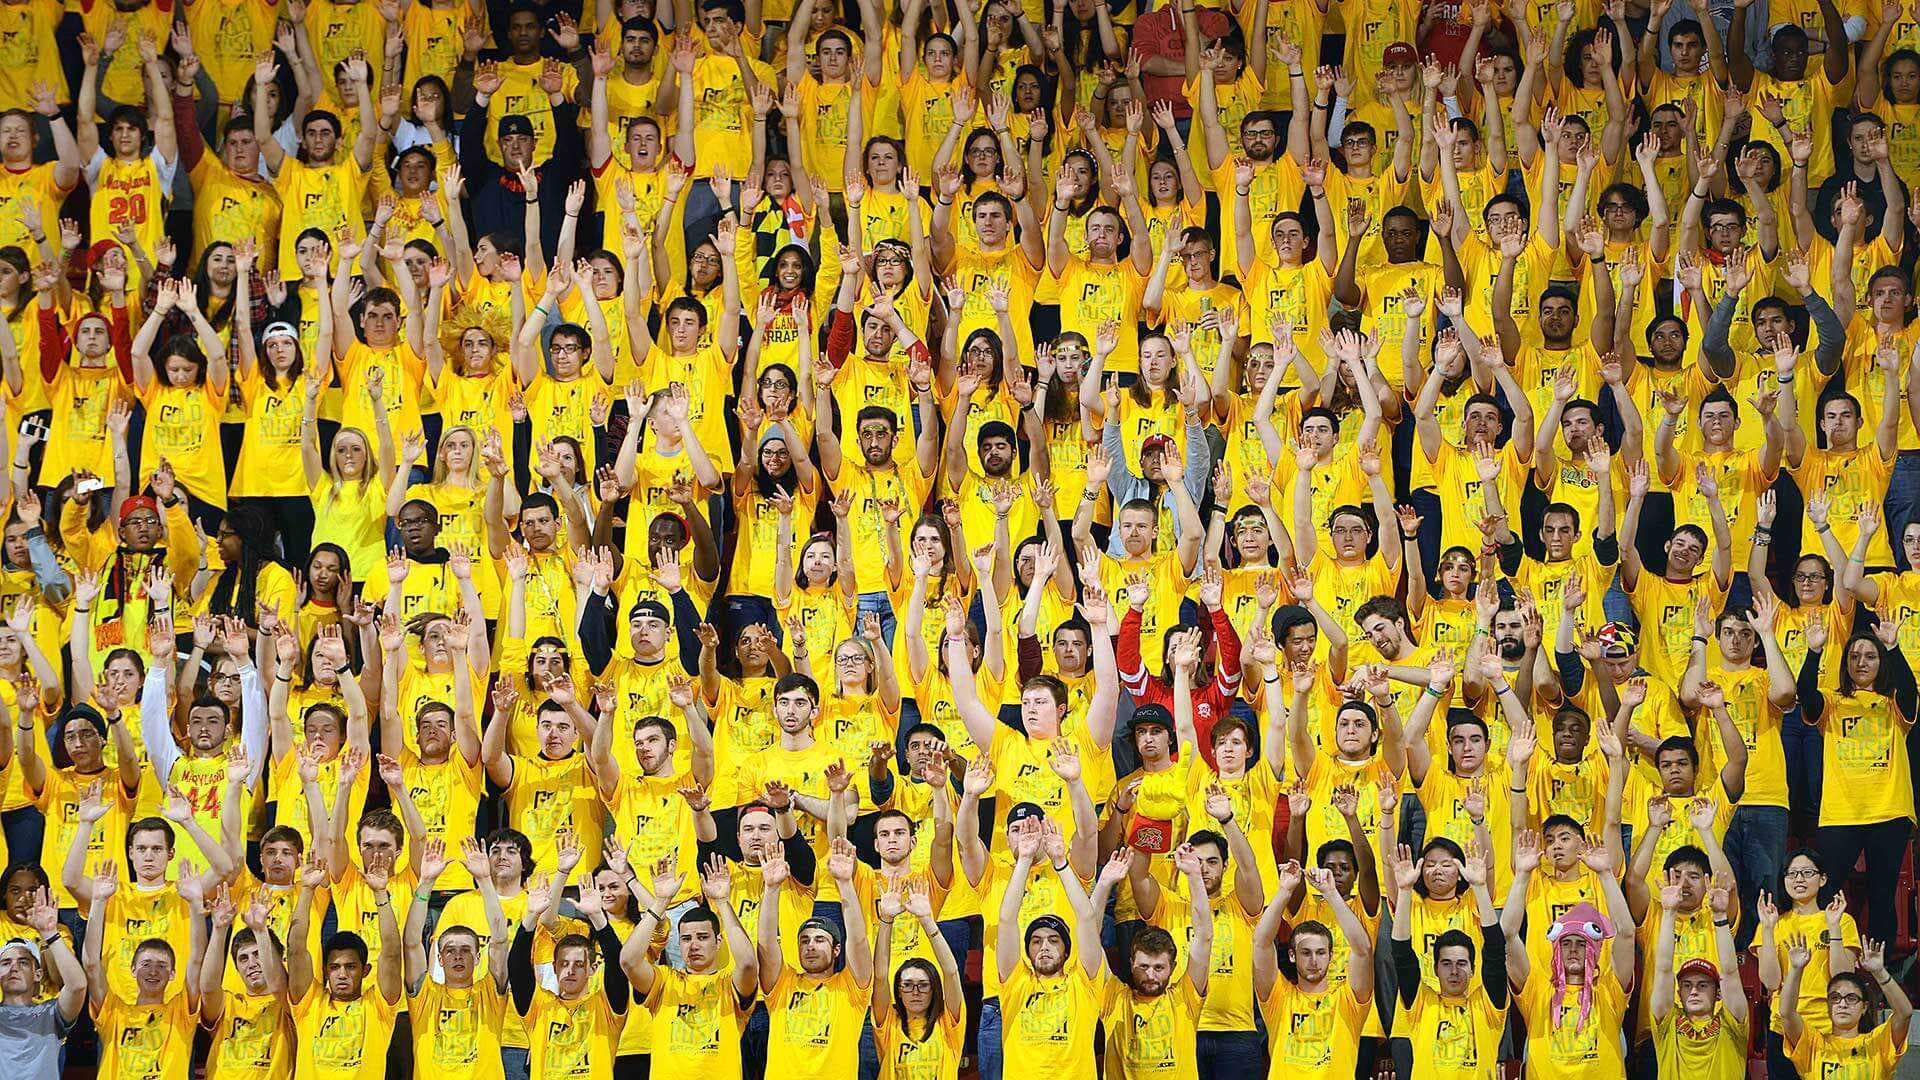 Wall of students celebrating the basketball game